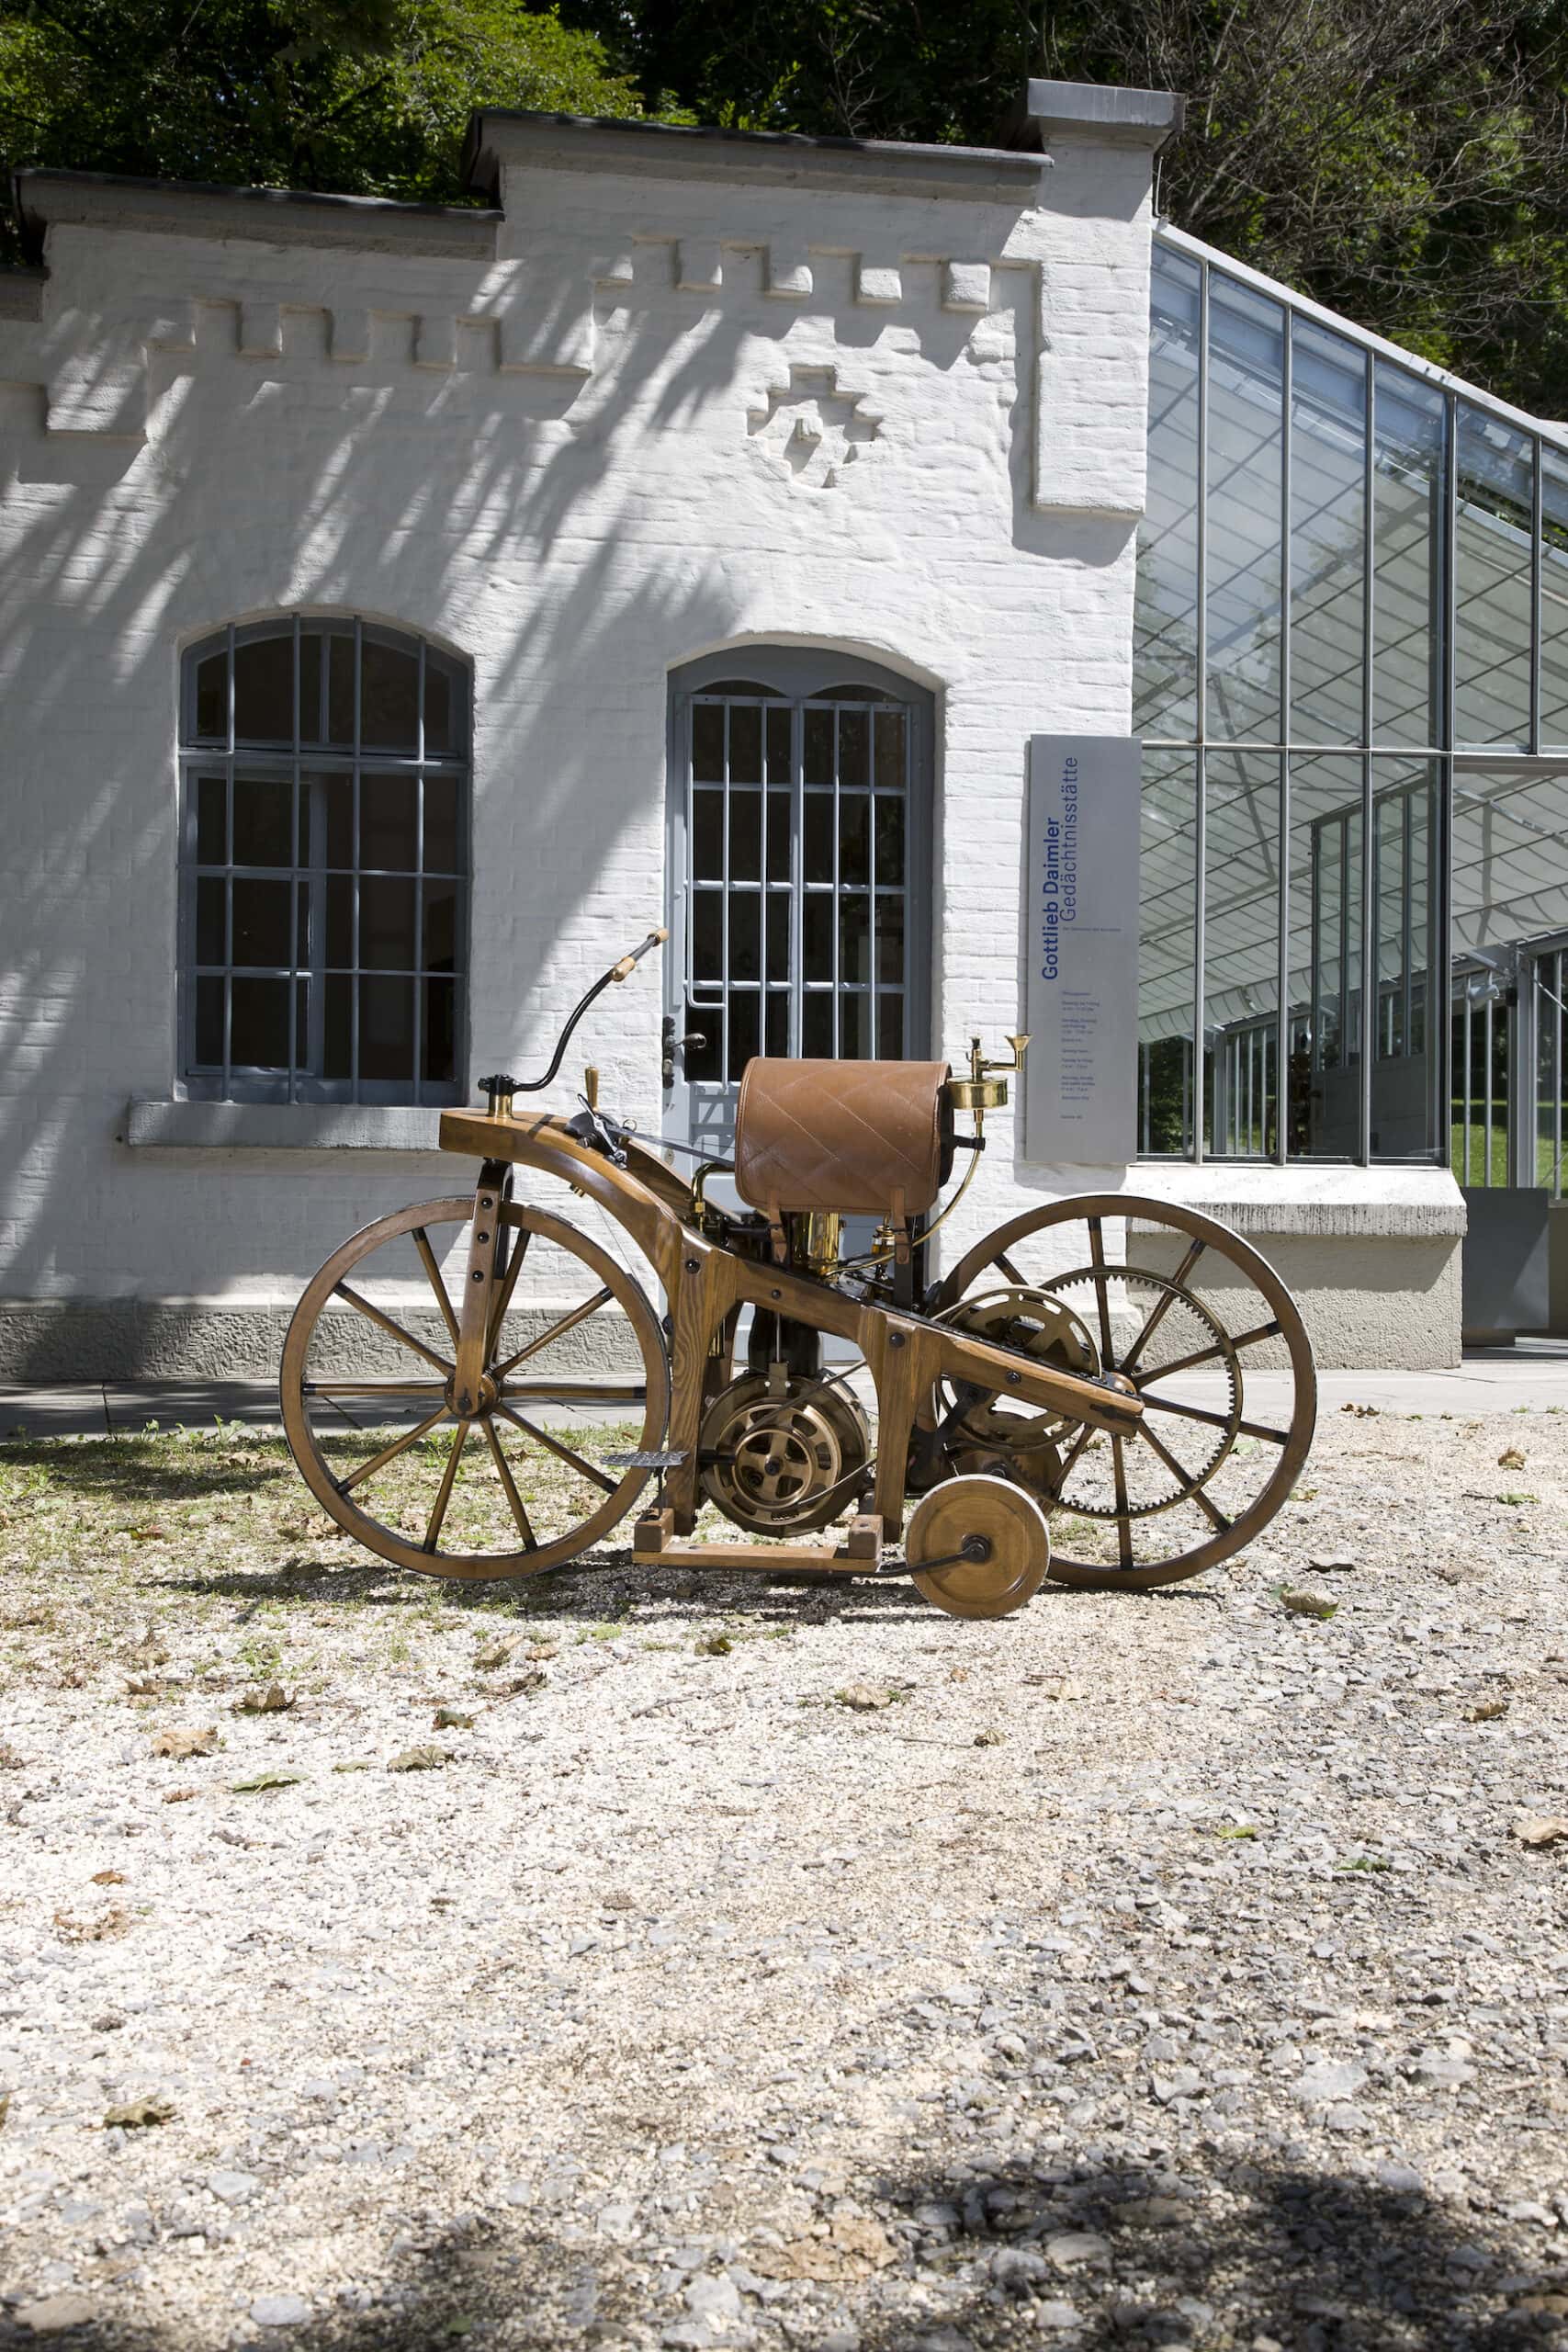 Replica of the riding car in front of the Gottlieb Daimler Memorial in Bad Cannstatt. In 1885, the riding car was built in this workshop as a test unit to prove the suitability of Gotllieb Daimler´s and Wilhelm Maybach´s gas or petroleum engine for everyday use. The riding car is the world´s first motorbike. Gottlieb Daimler applied for the patent on 29 August 1885.